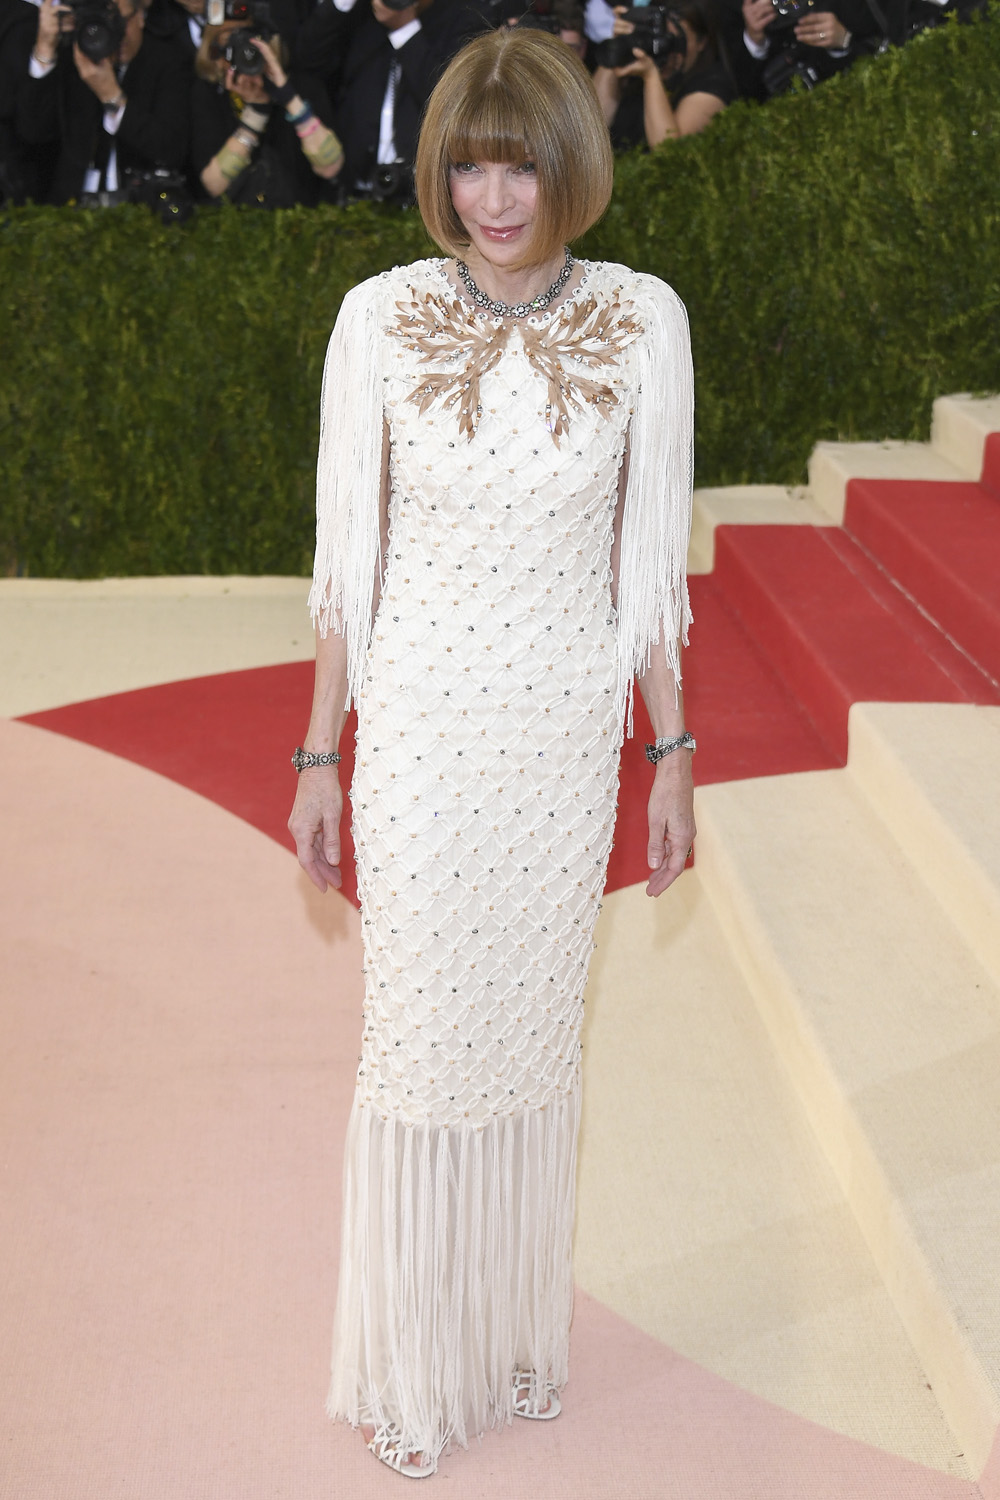 Anna Wintour in Chanel.